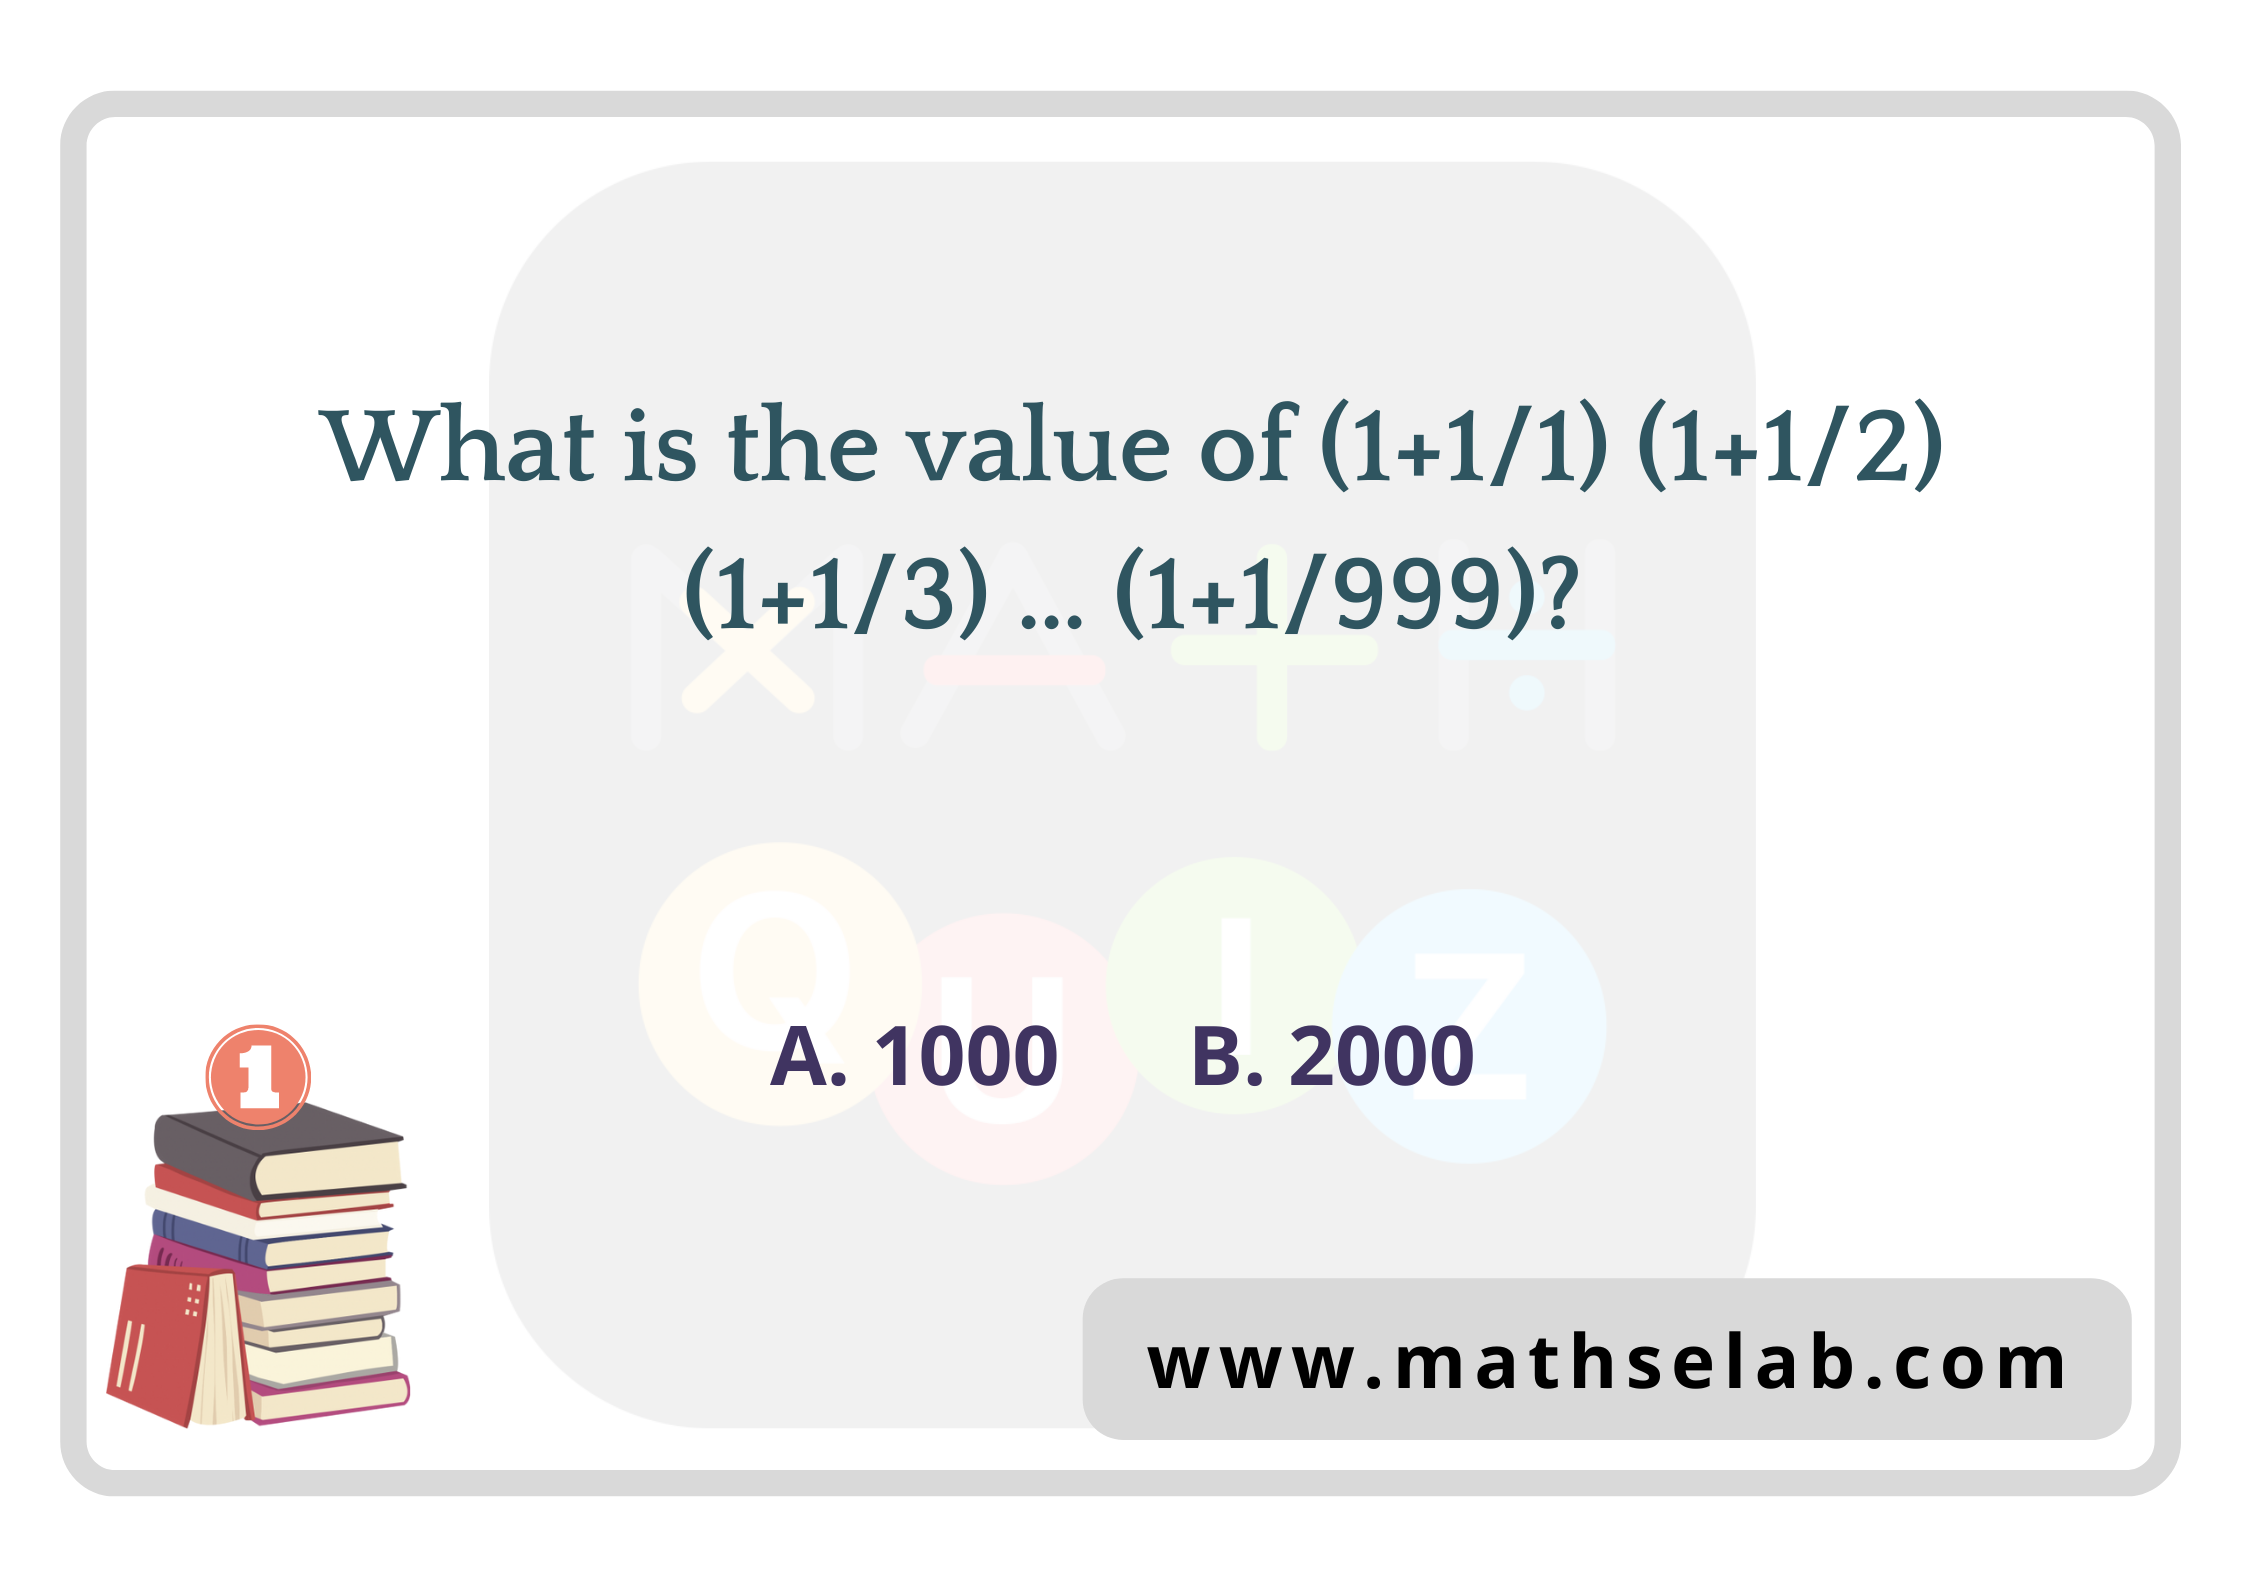 What is the value of (1+1/1) (1+1/2) (1+1/3) … (1+1/999)?